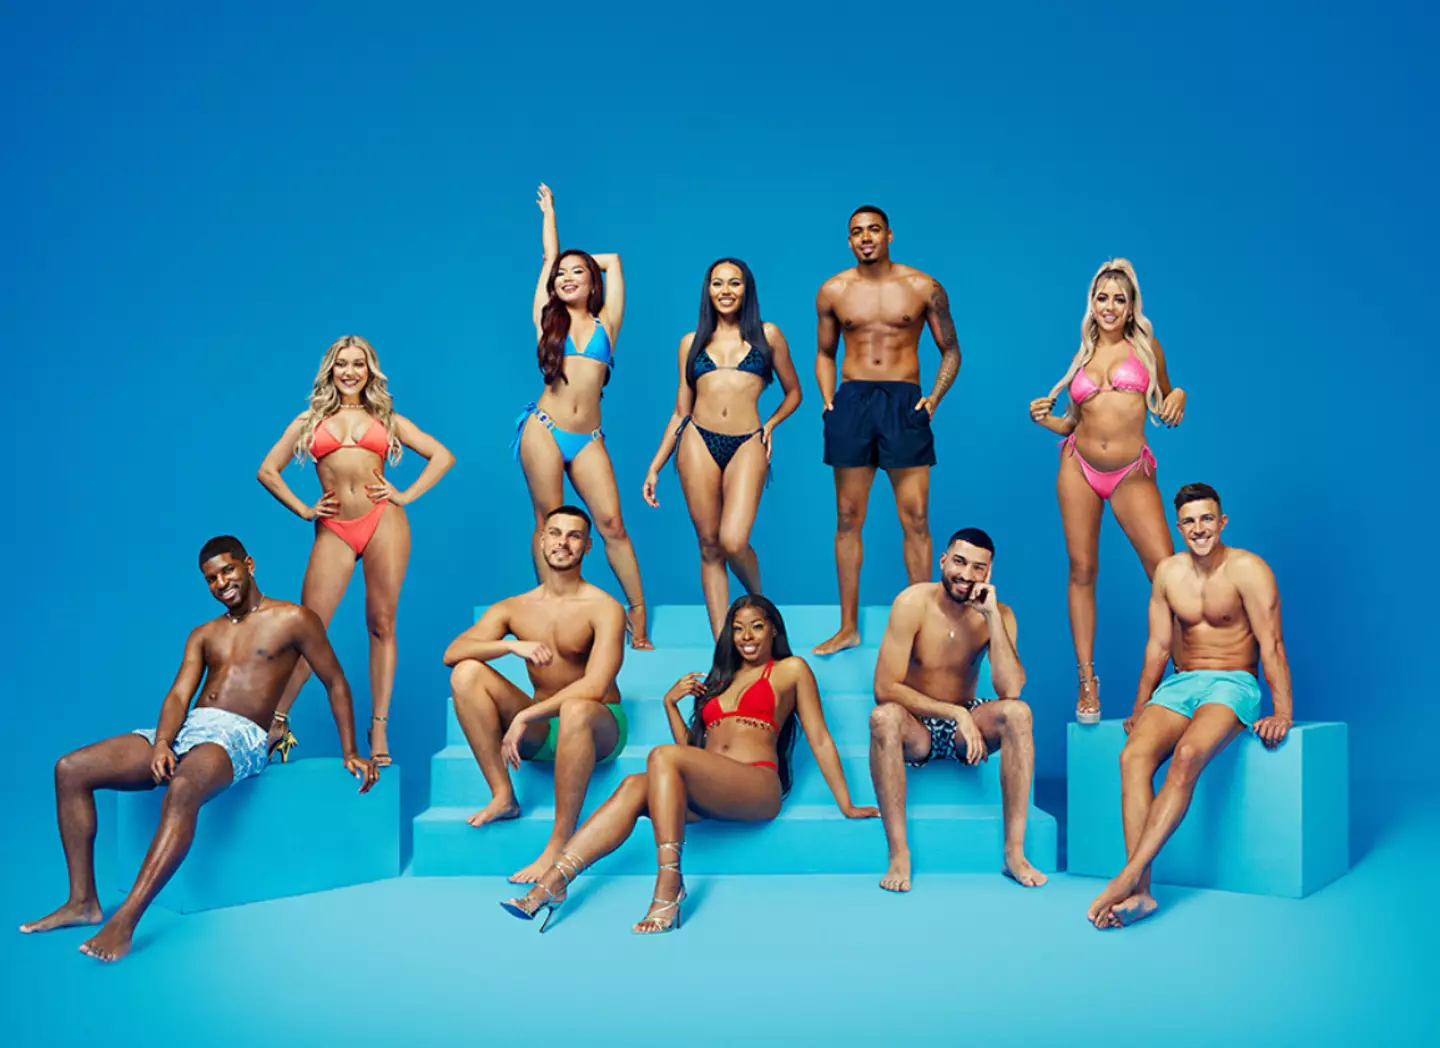 Love Island is back for a tenth season.